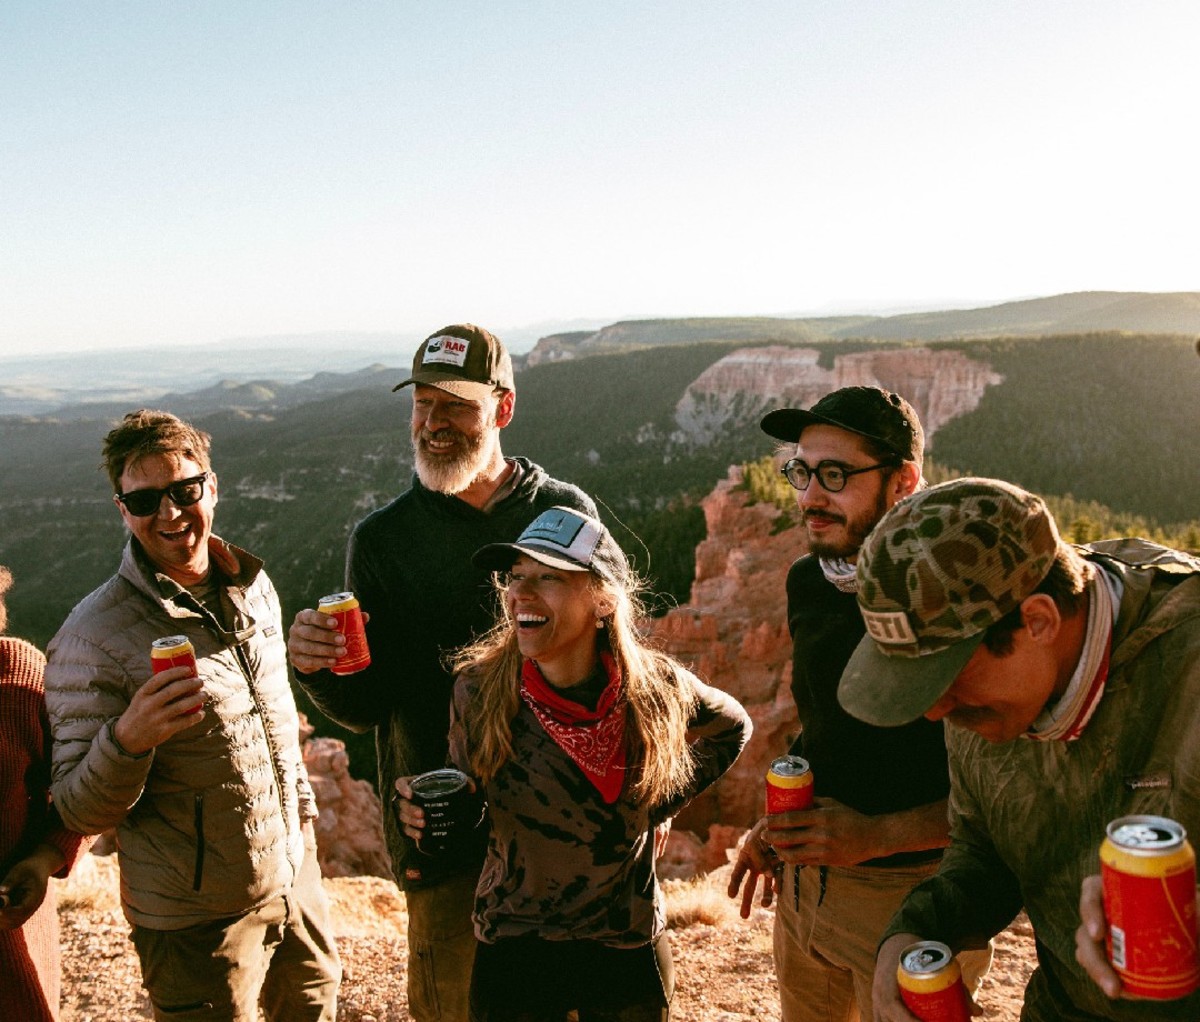 Group of men and women standing at top of ledge drinking beers